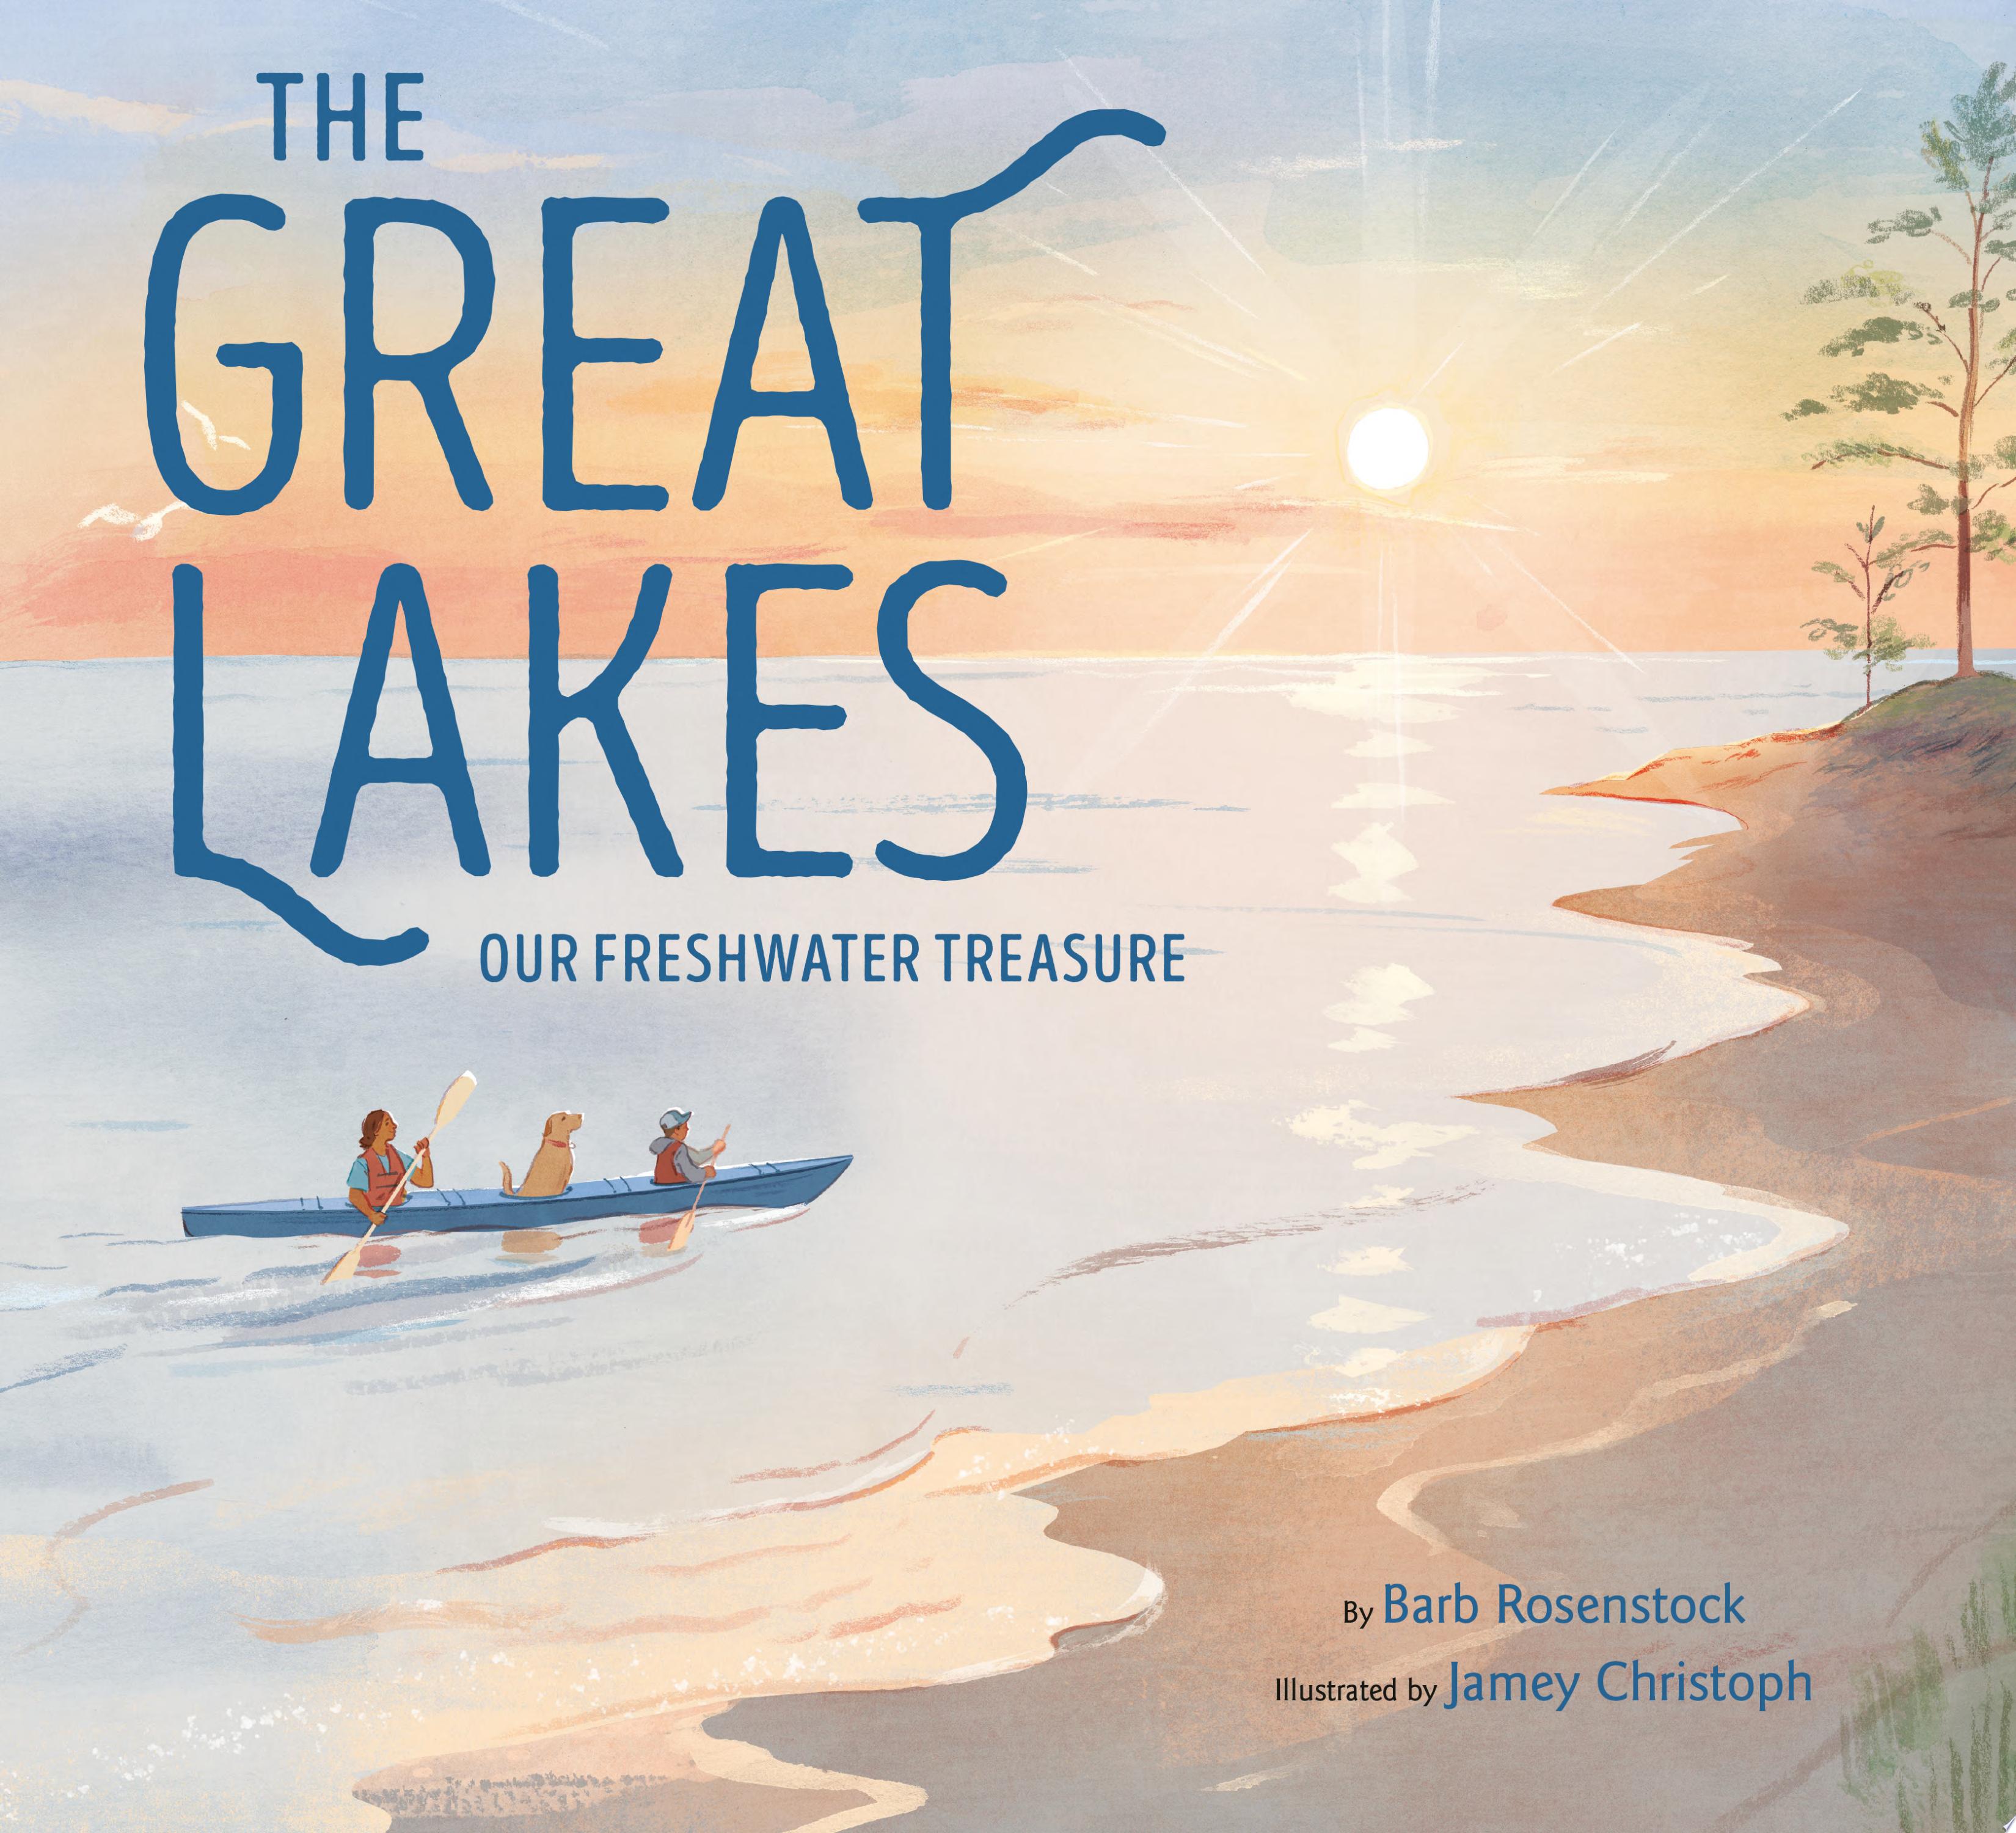 Image for "The Great Lakes"